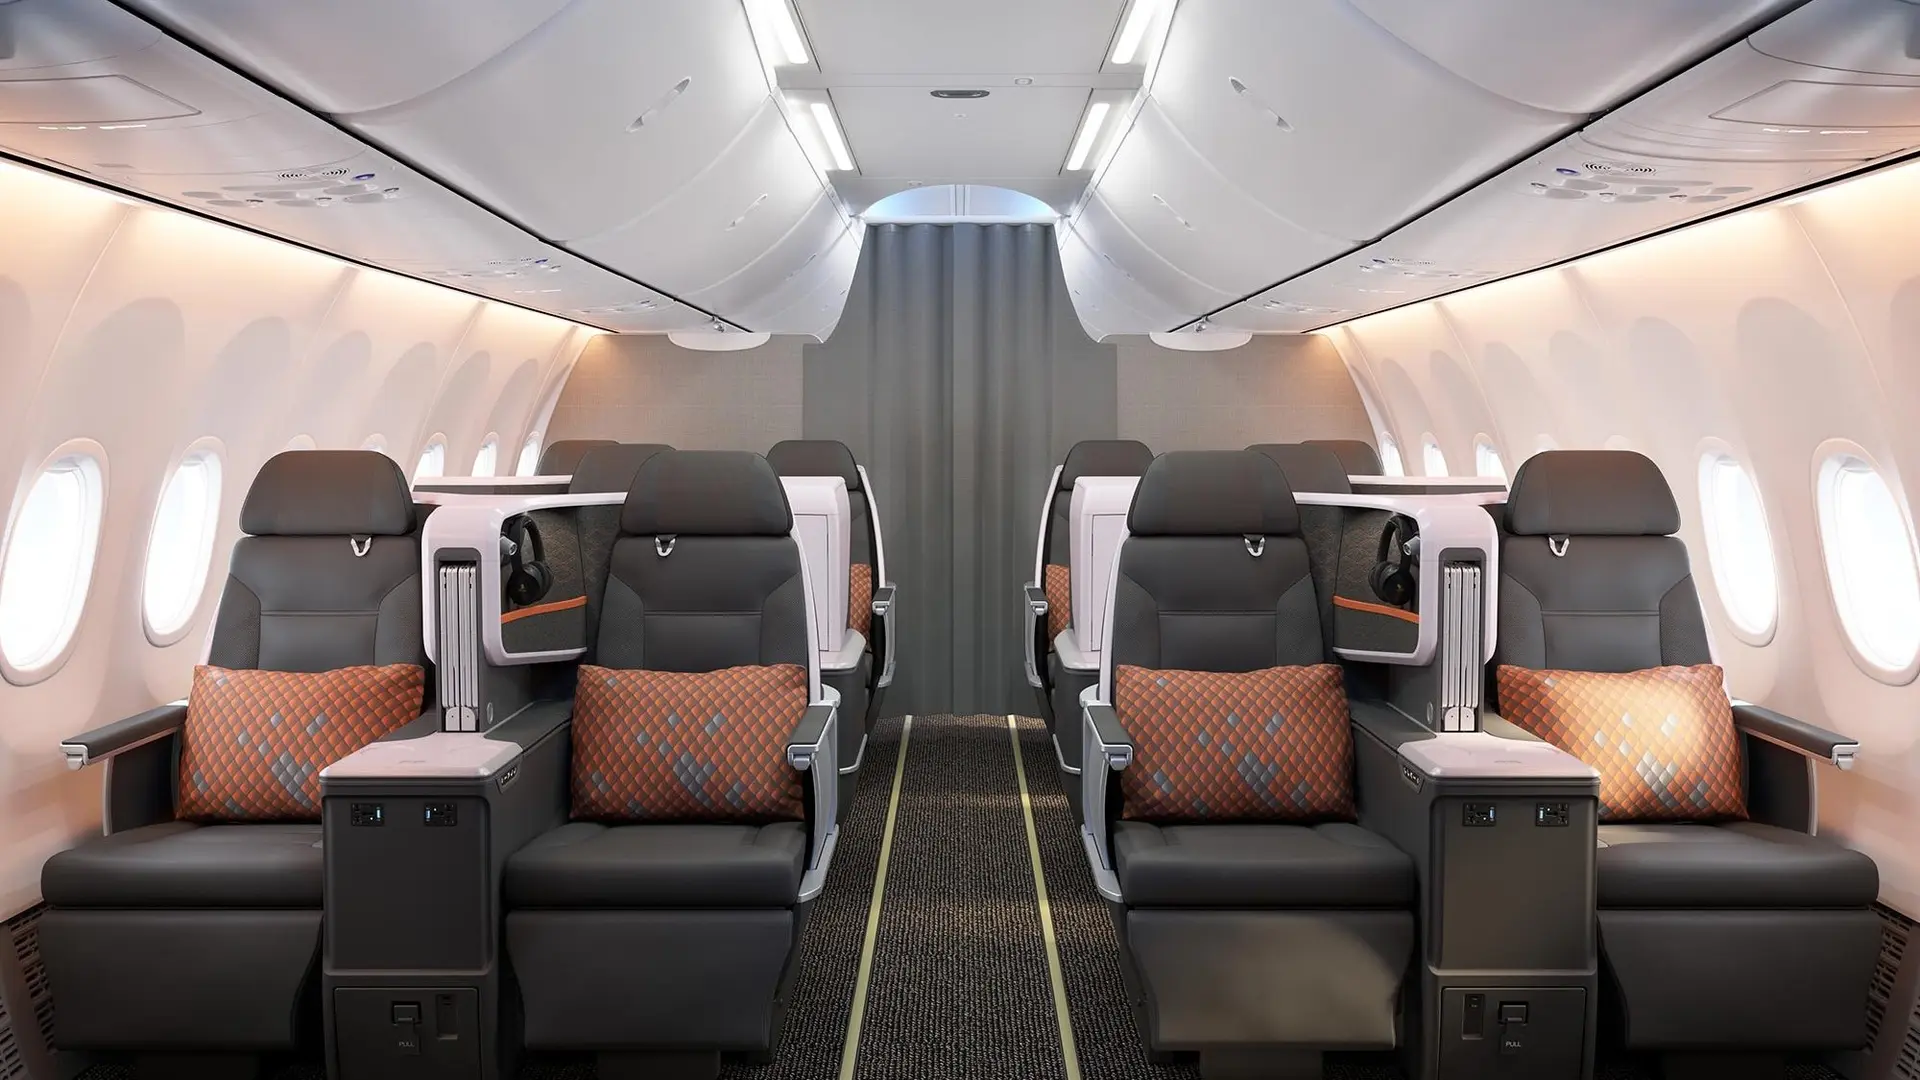 Airlines News - Singapore Airlines unveils a new Business Class flat-bed for its short-haul aircraft